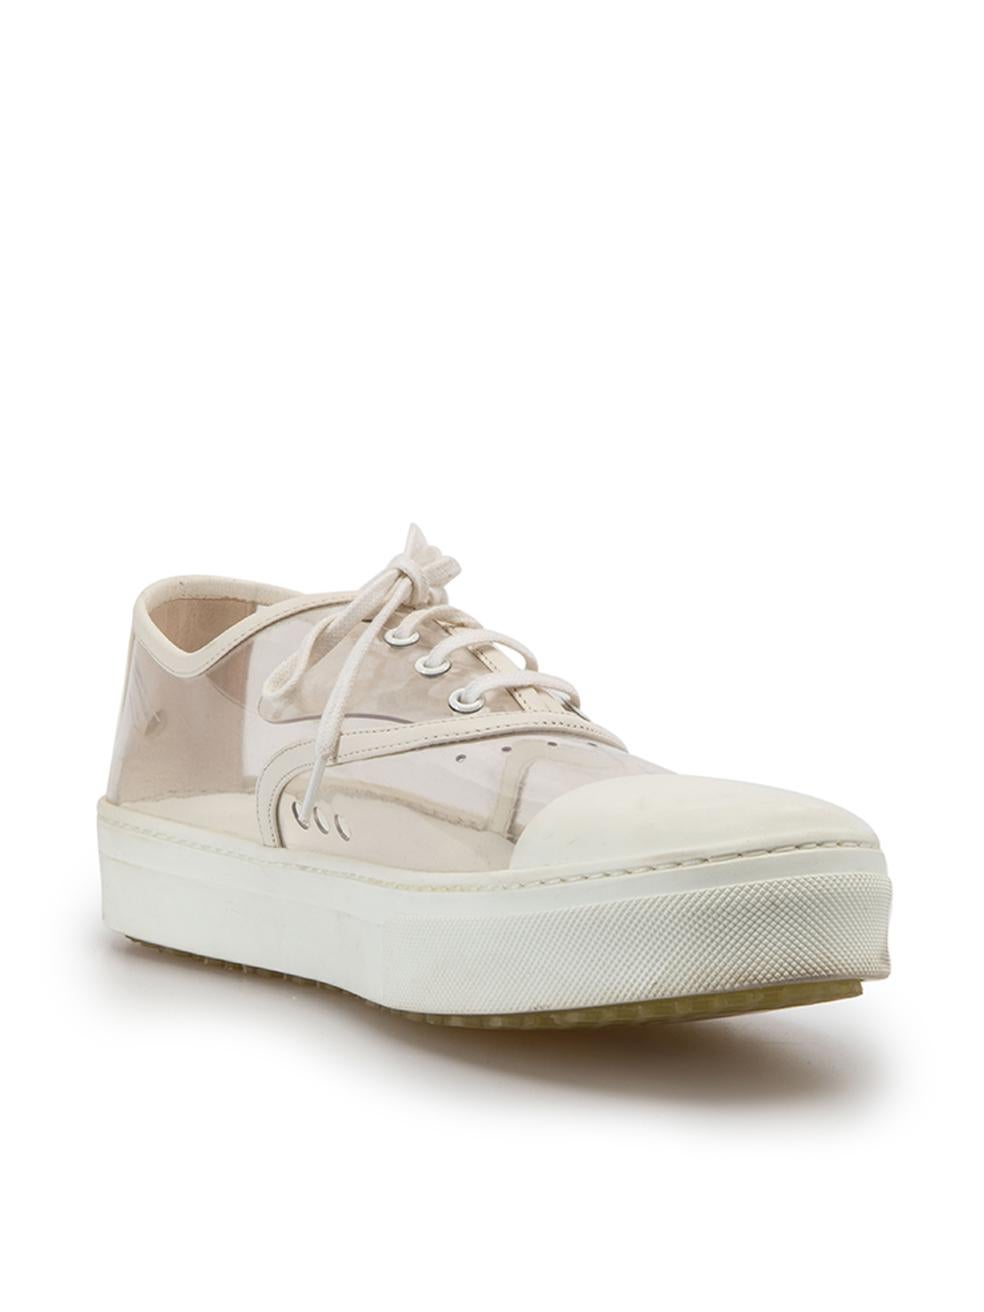 CONDITION is Good. Minor wear to shoes is evident. Light wear to soles with scuffing around both shoes, particularly at the toes and heel on this used Céline designer resale item. 



Details


White

Leather and PVC

Low top trainers

Lace